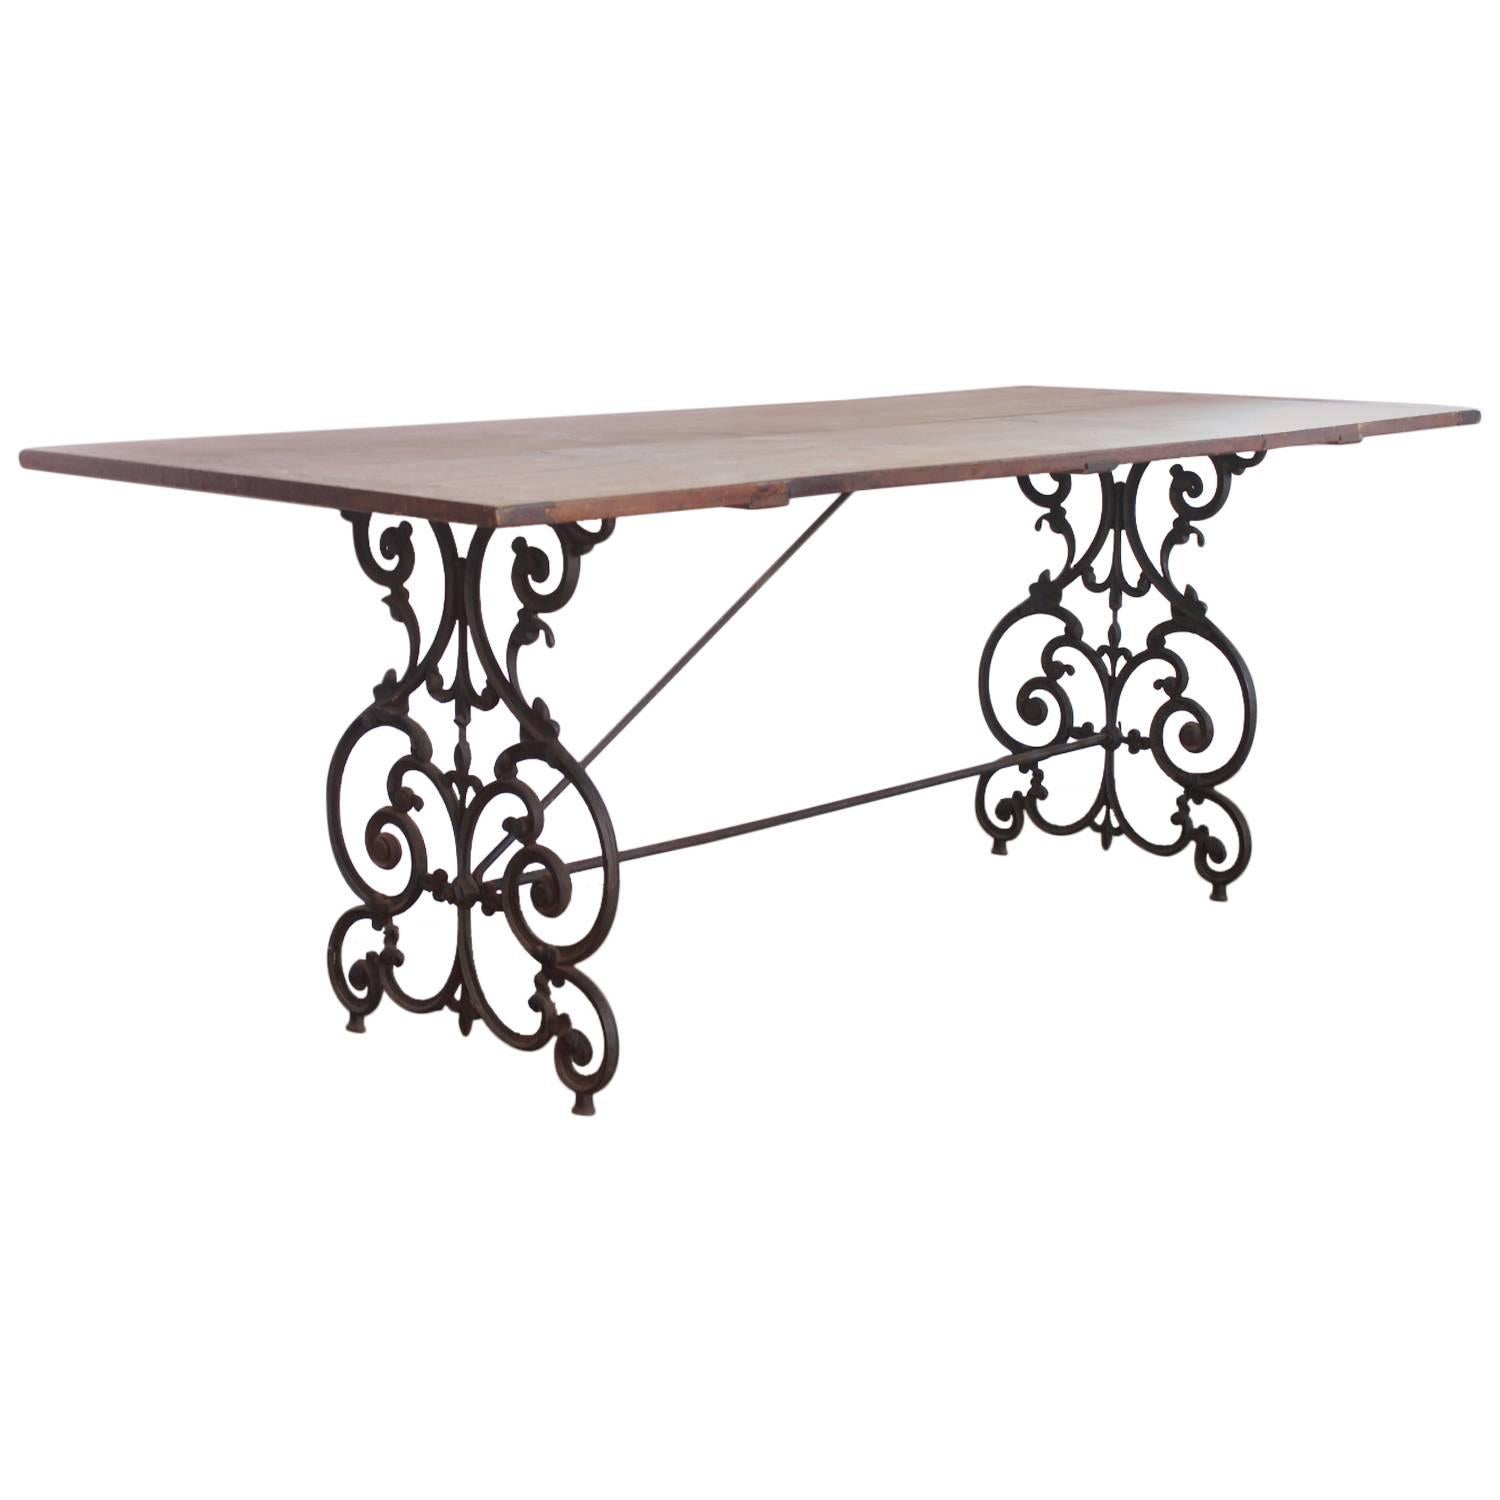 American Wrought Iron and Wood Base Dining Table, circa 1900s